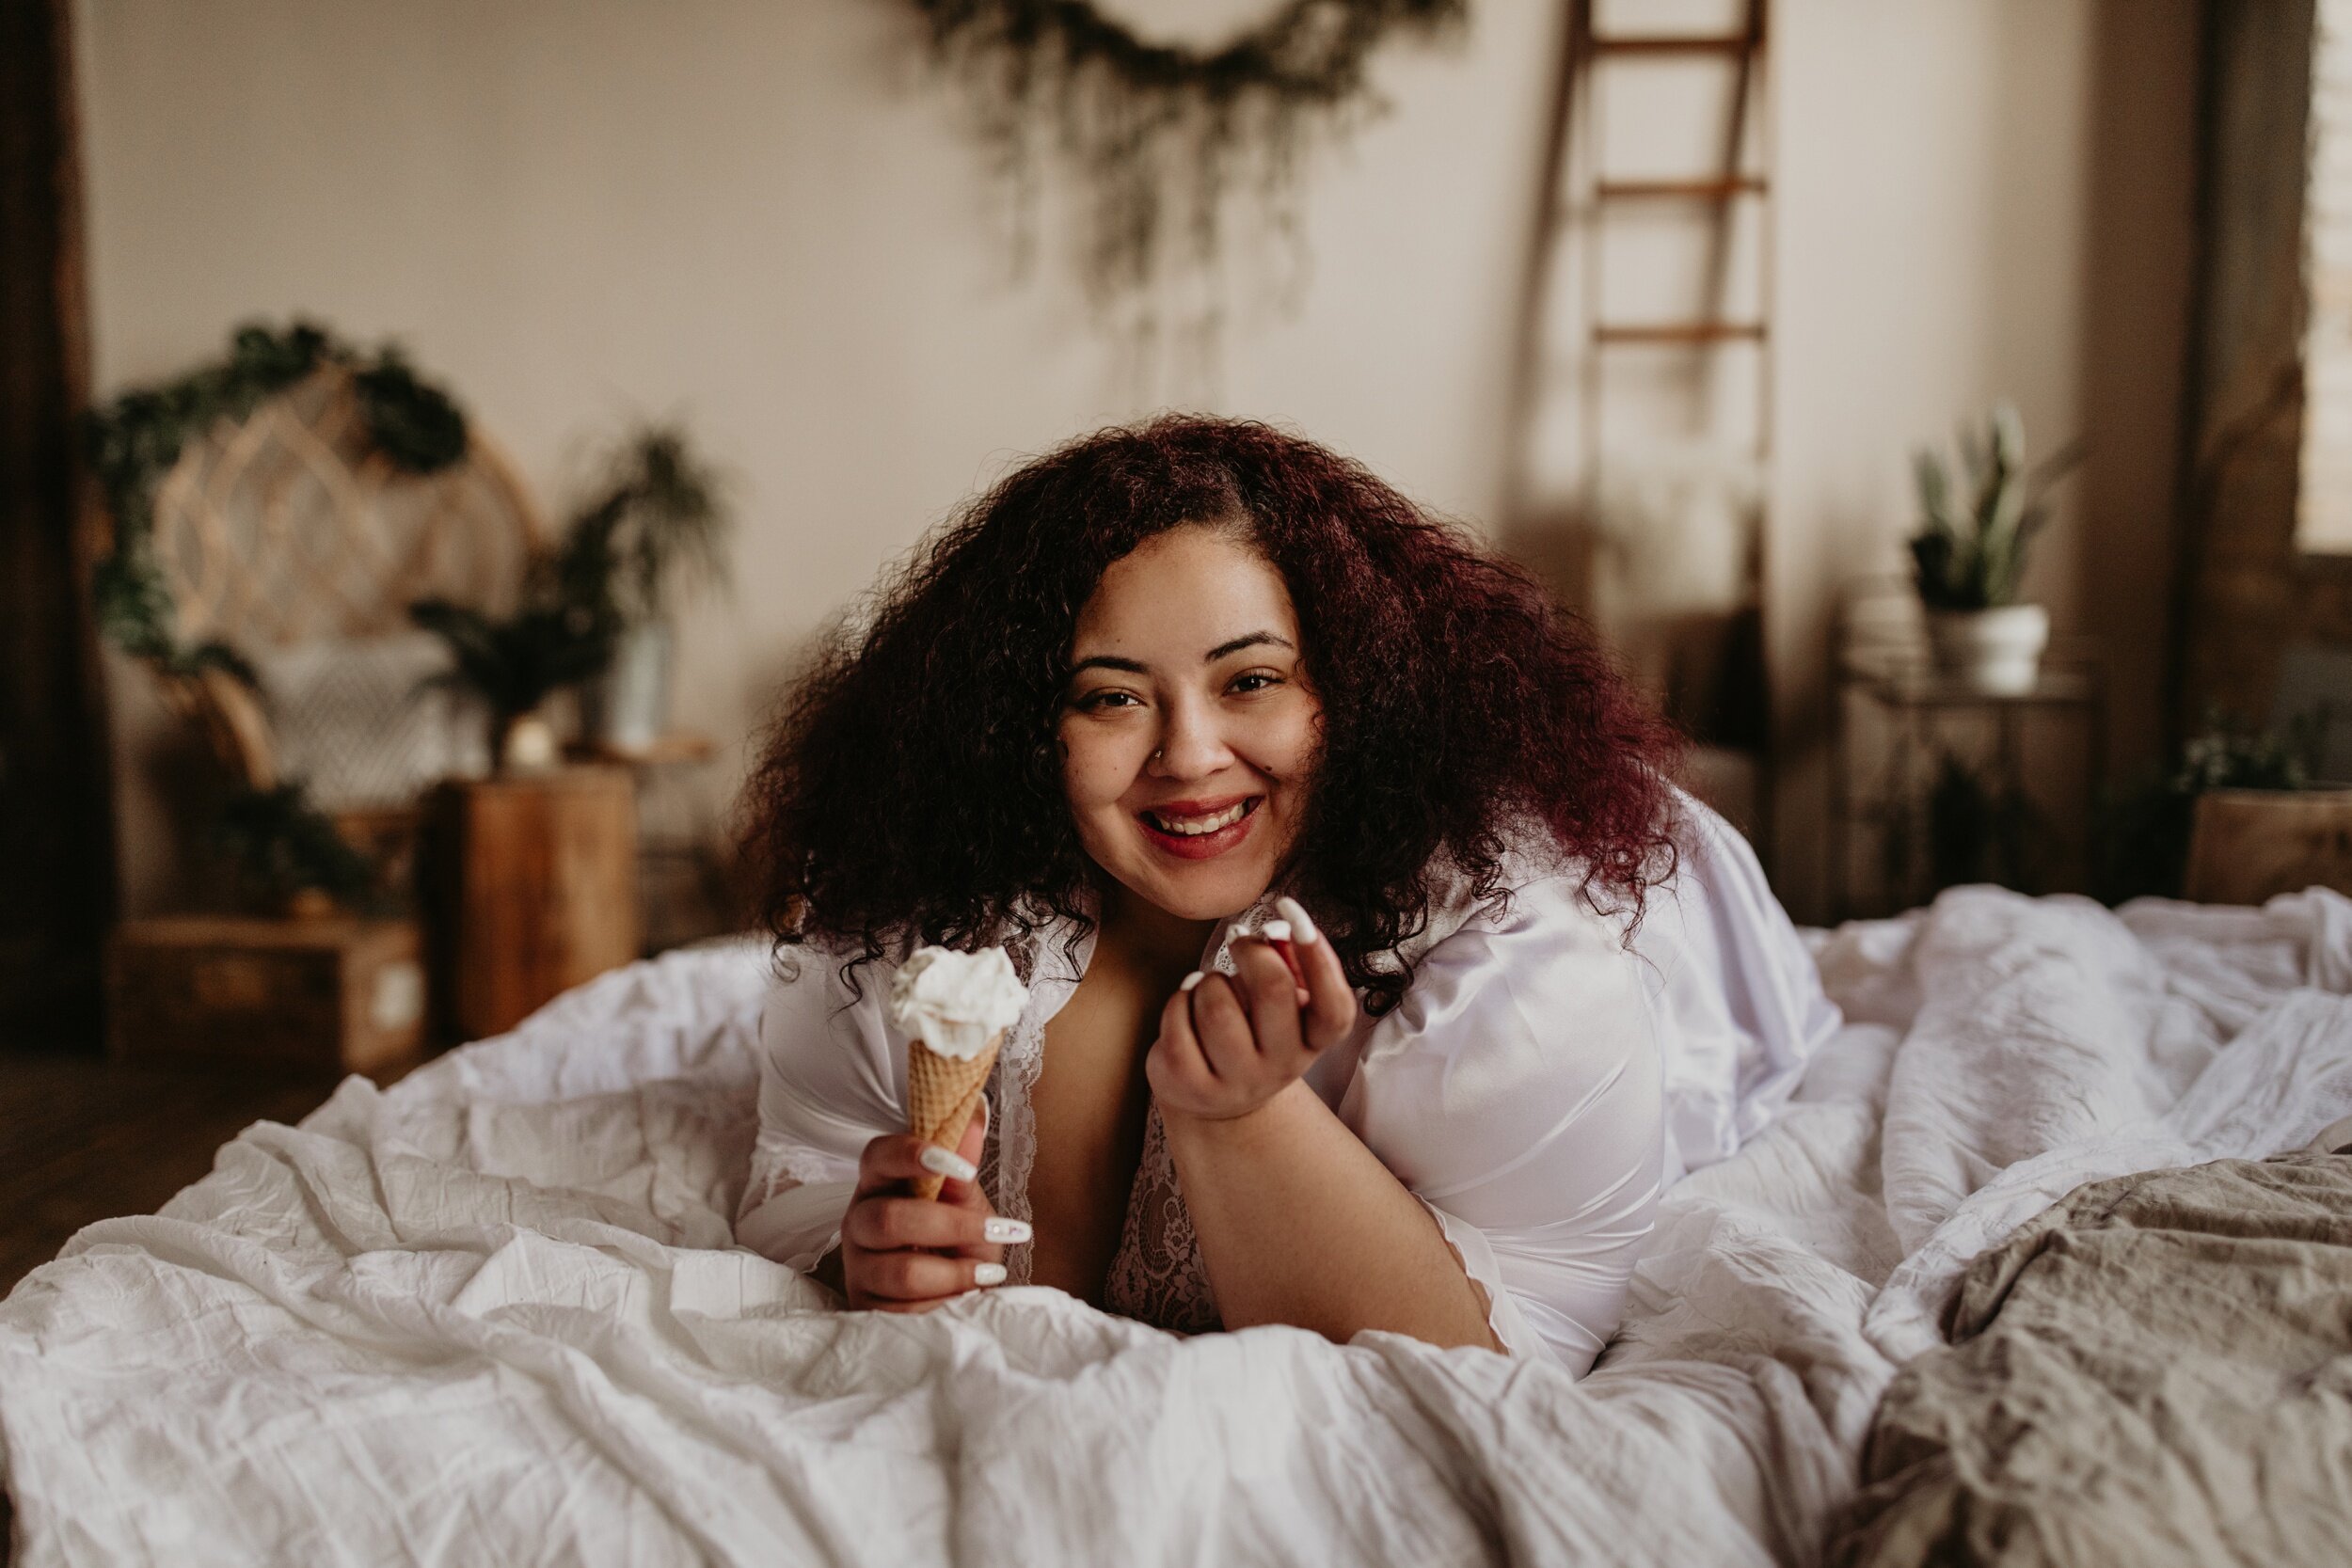 Boudoir-Portraits-with-Ice-Cream-Gummy-Candy-Red-Licorice-Cereal-0033.JPG